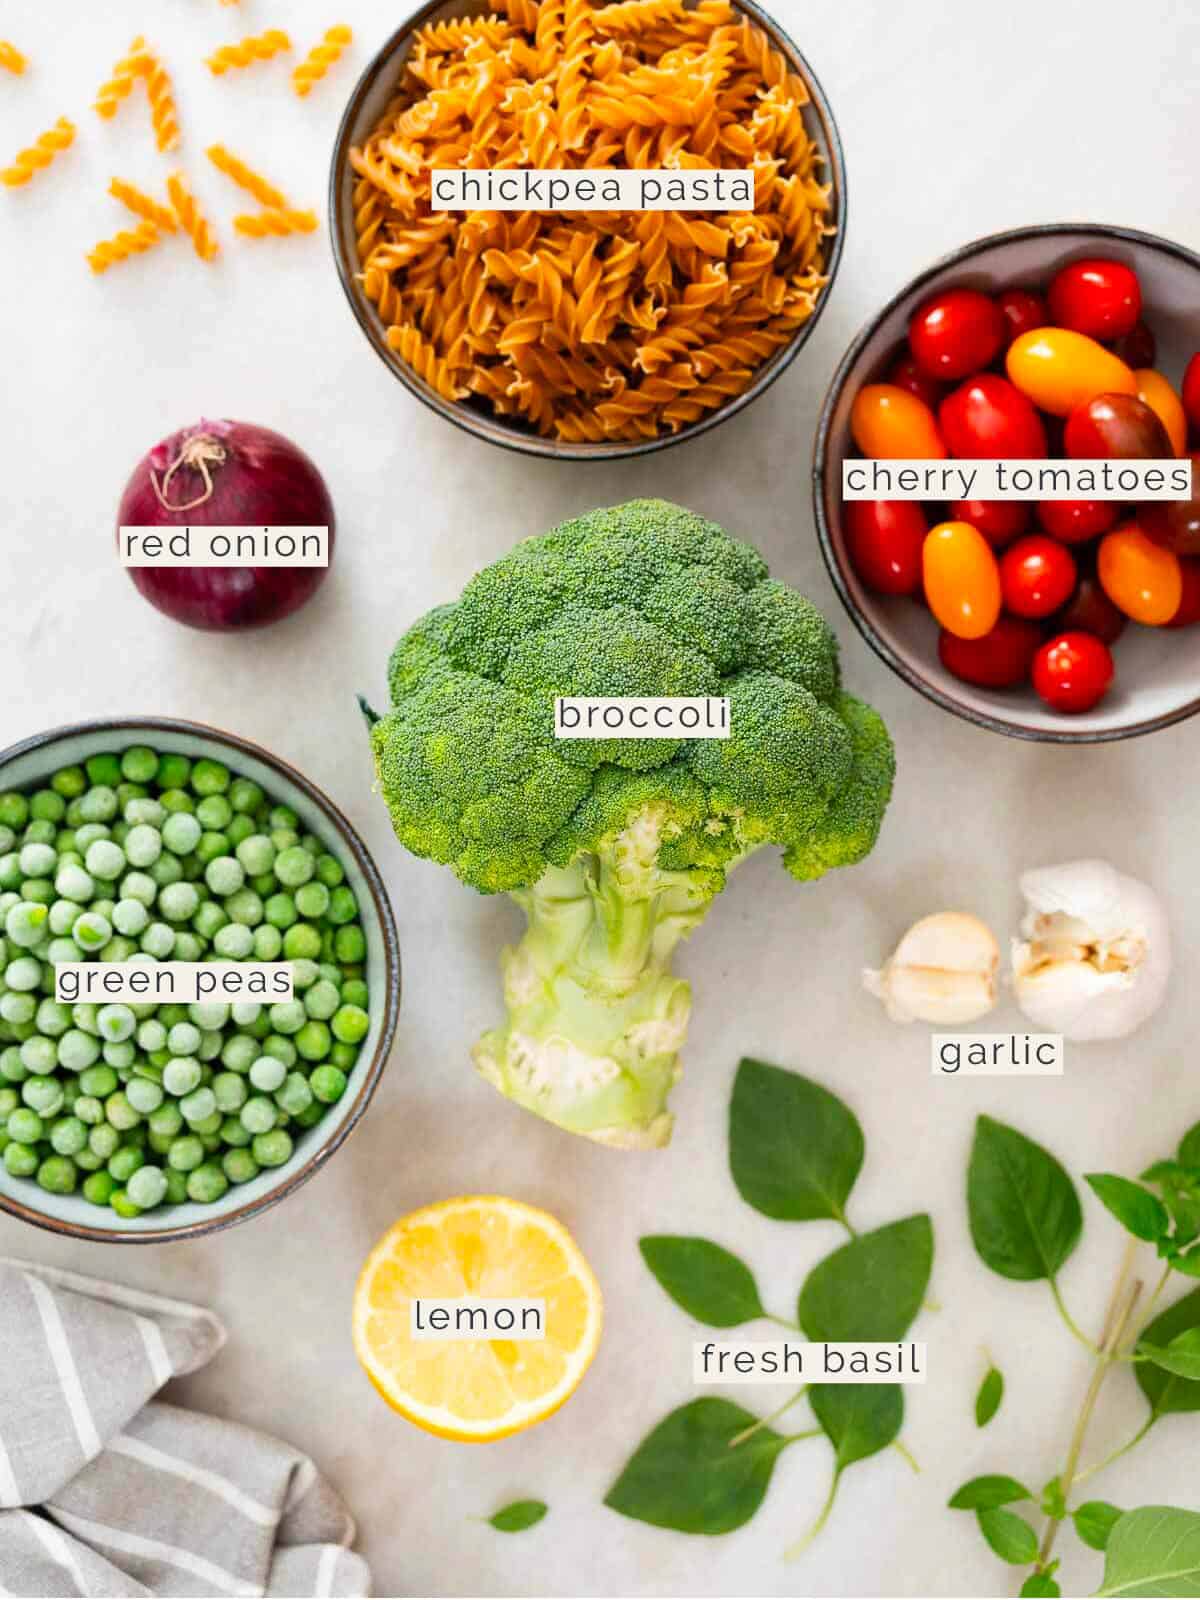 labeled ingredients to make a high-protein healthy pasta salad.